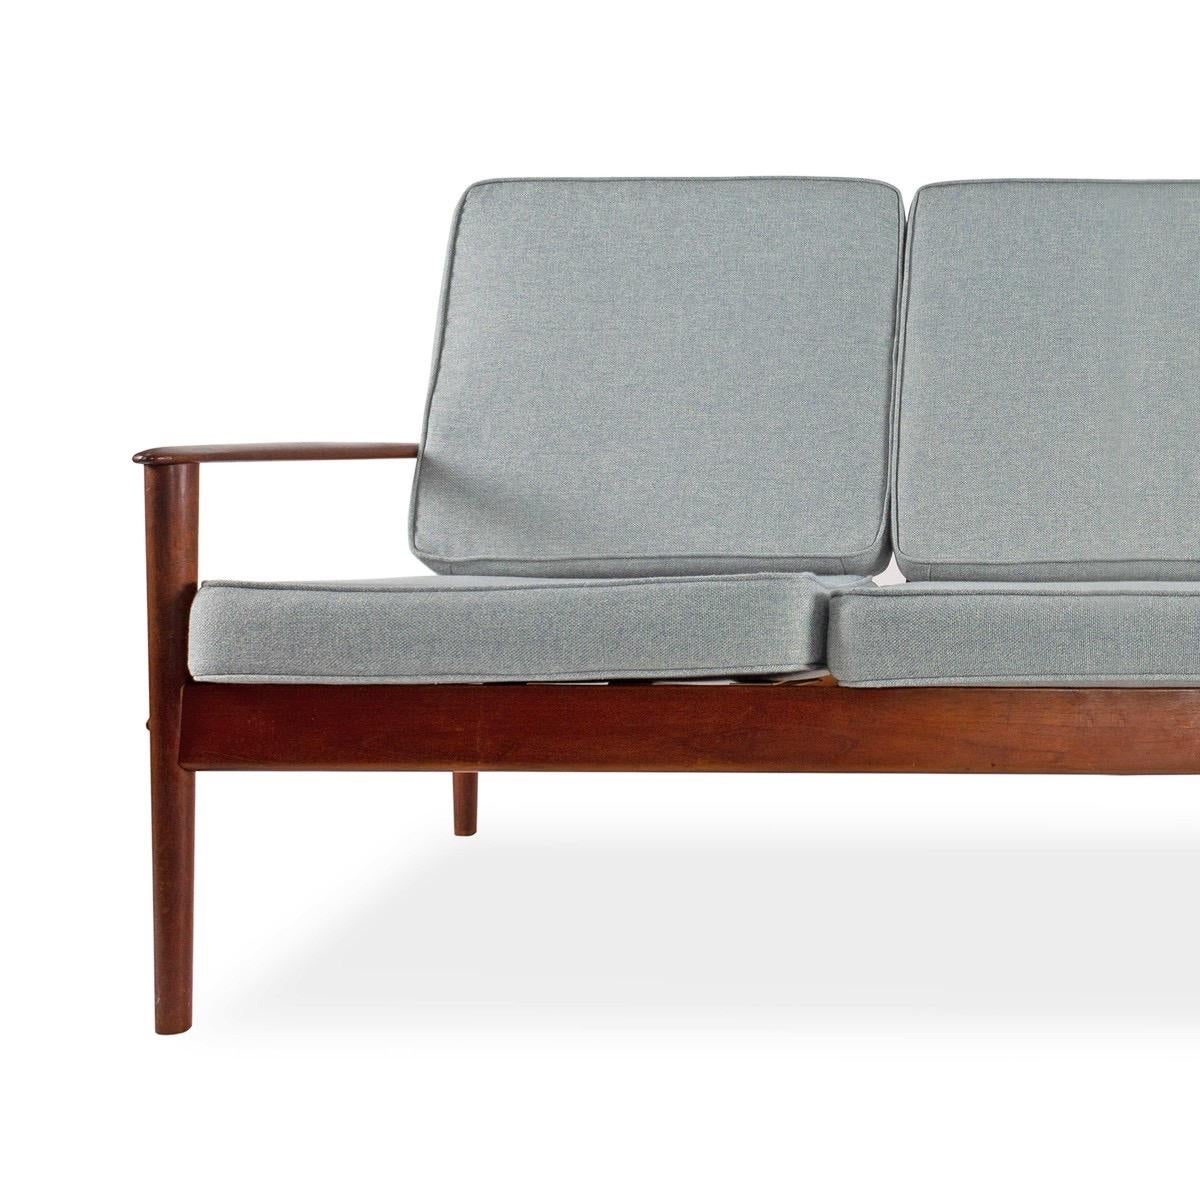 A three-seat teak-framed sofa with newly re-upholstered seat and back cushions, Denmark, circa 1960. Signed.

Gray fabric.

Dimensions: 70